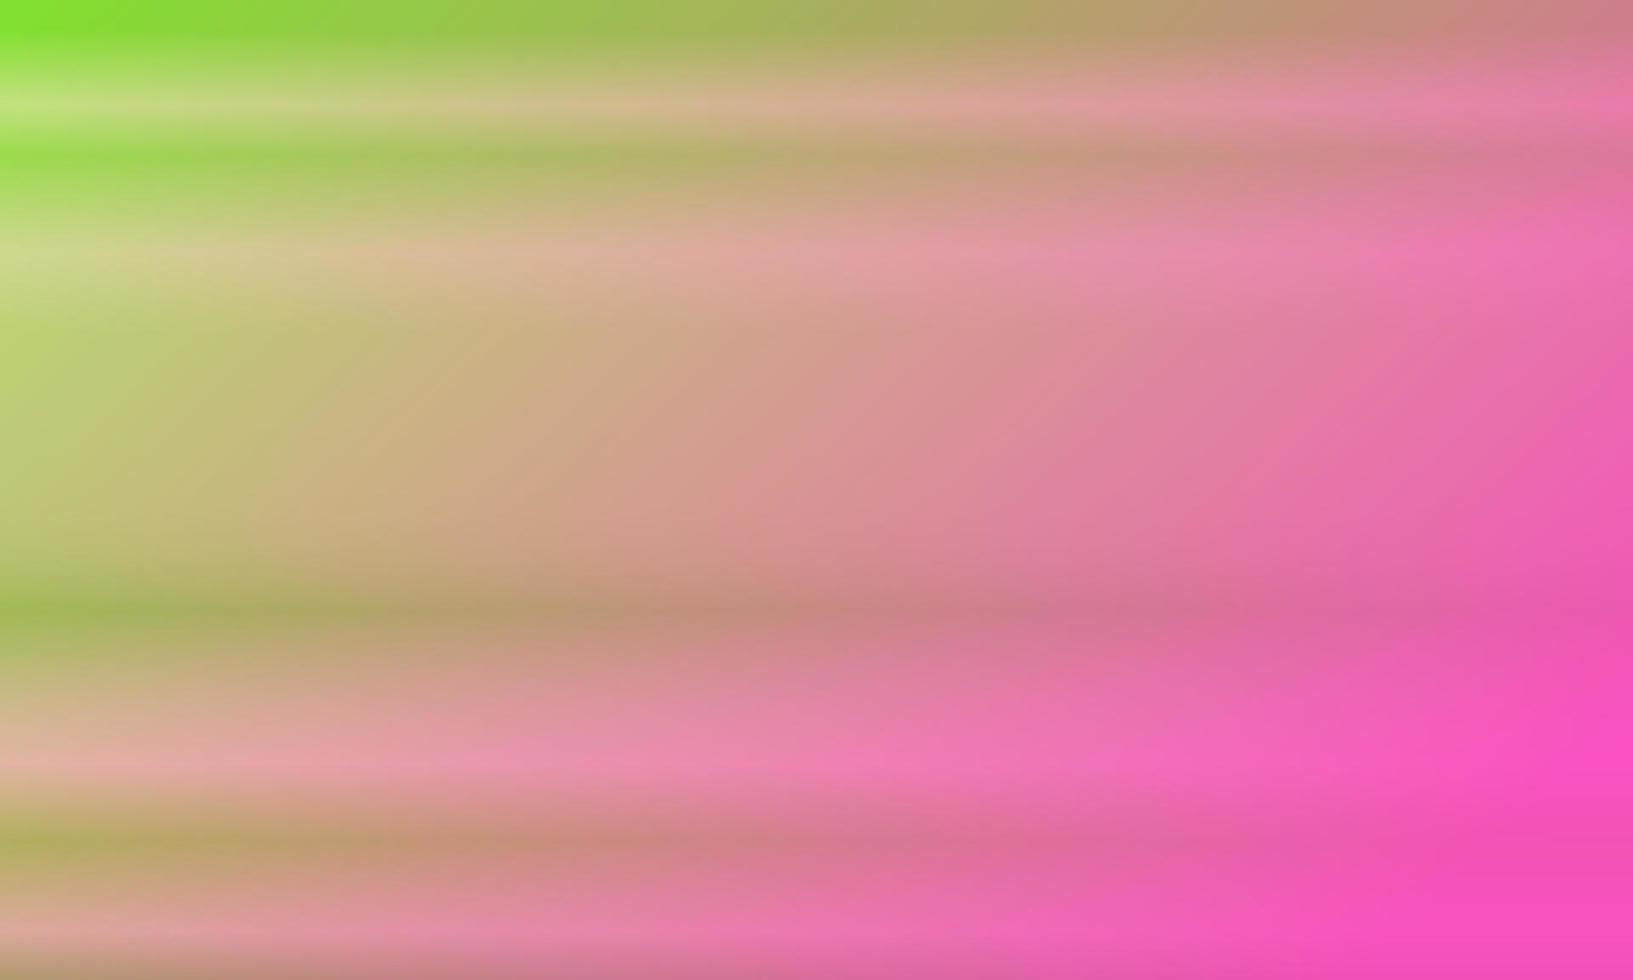 light green and pink horizontal gradient abstract background. shiny, blur, simple, modern and colorful style. great for backdrop, homepage, wallpaper, card, cover, poster, banner or flyer vector